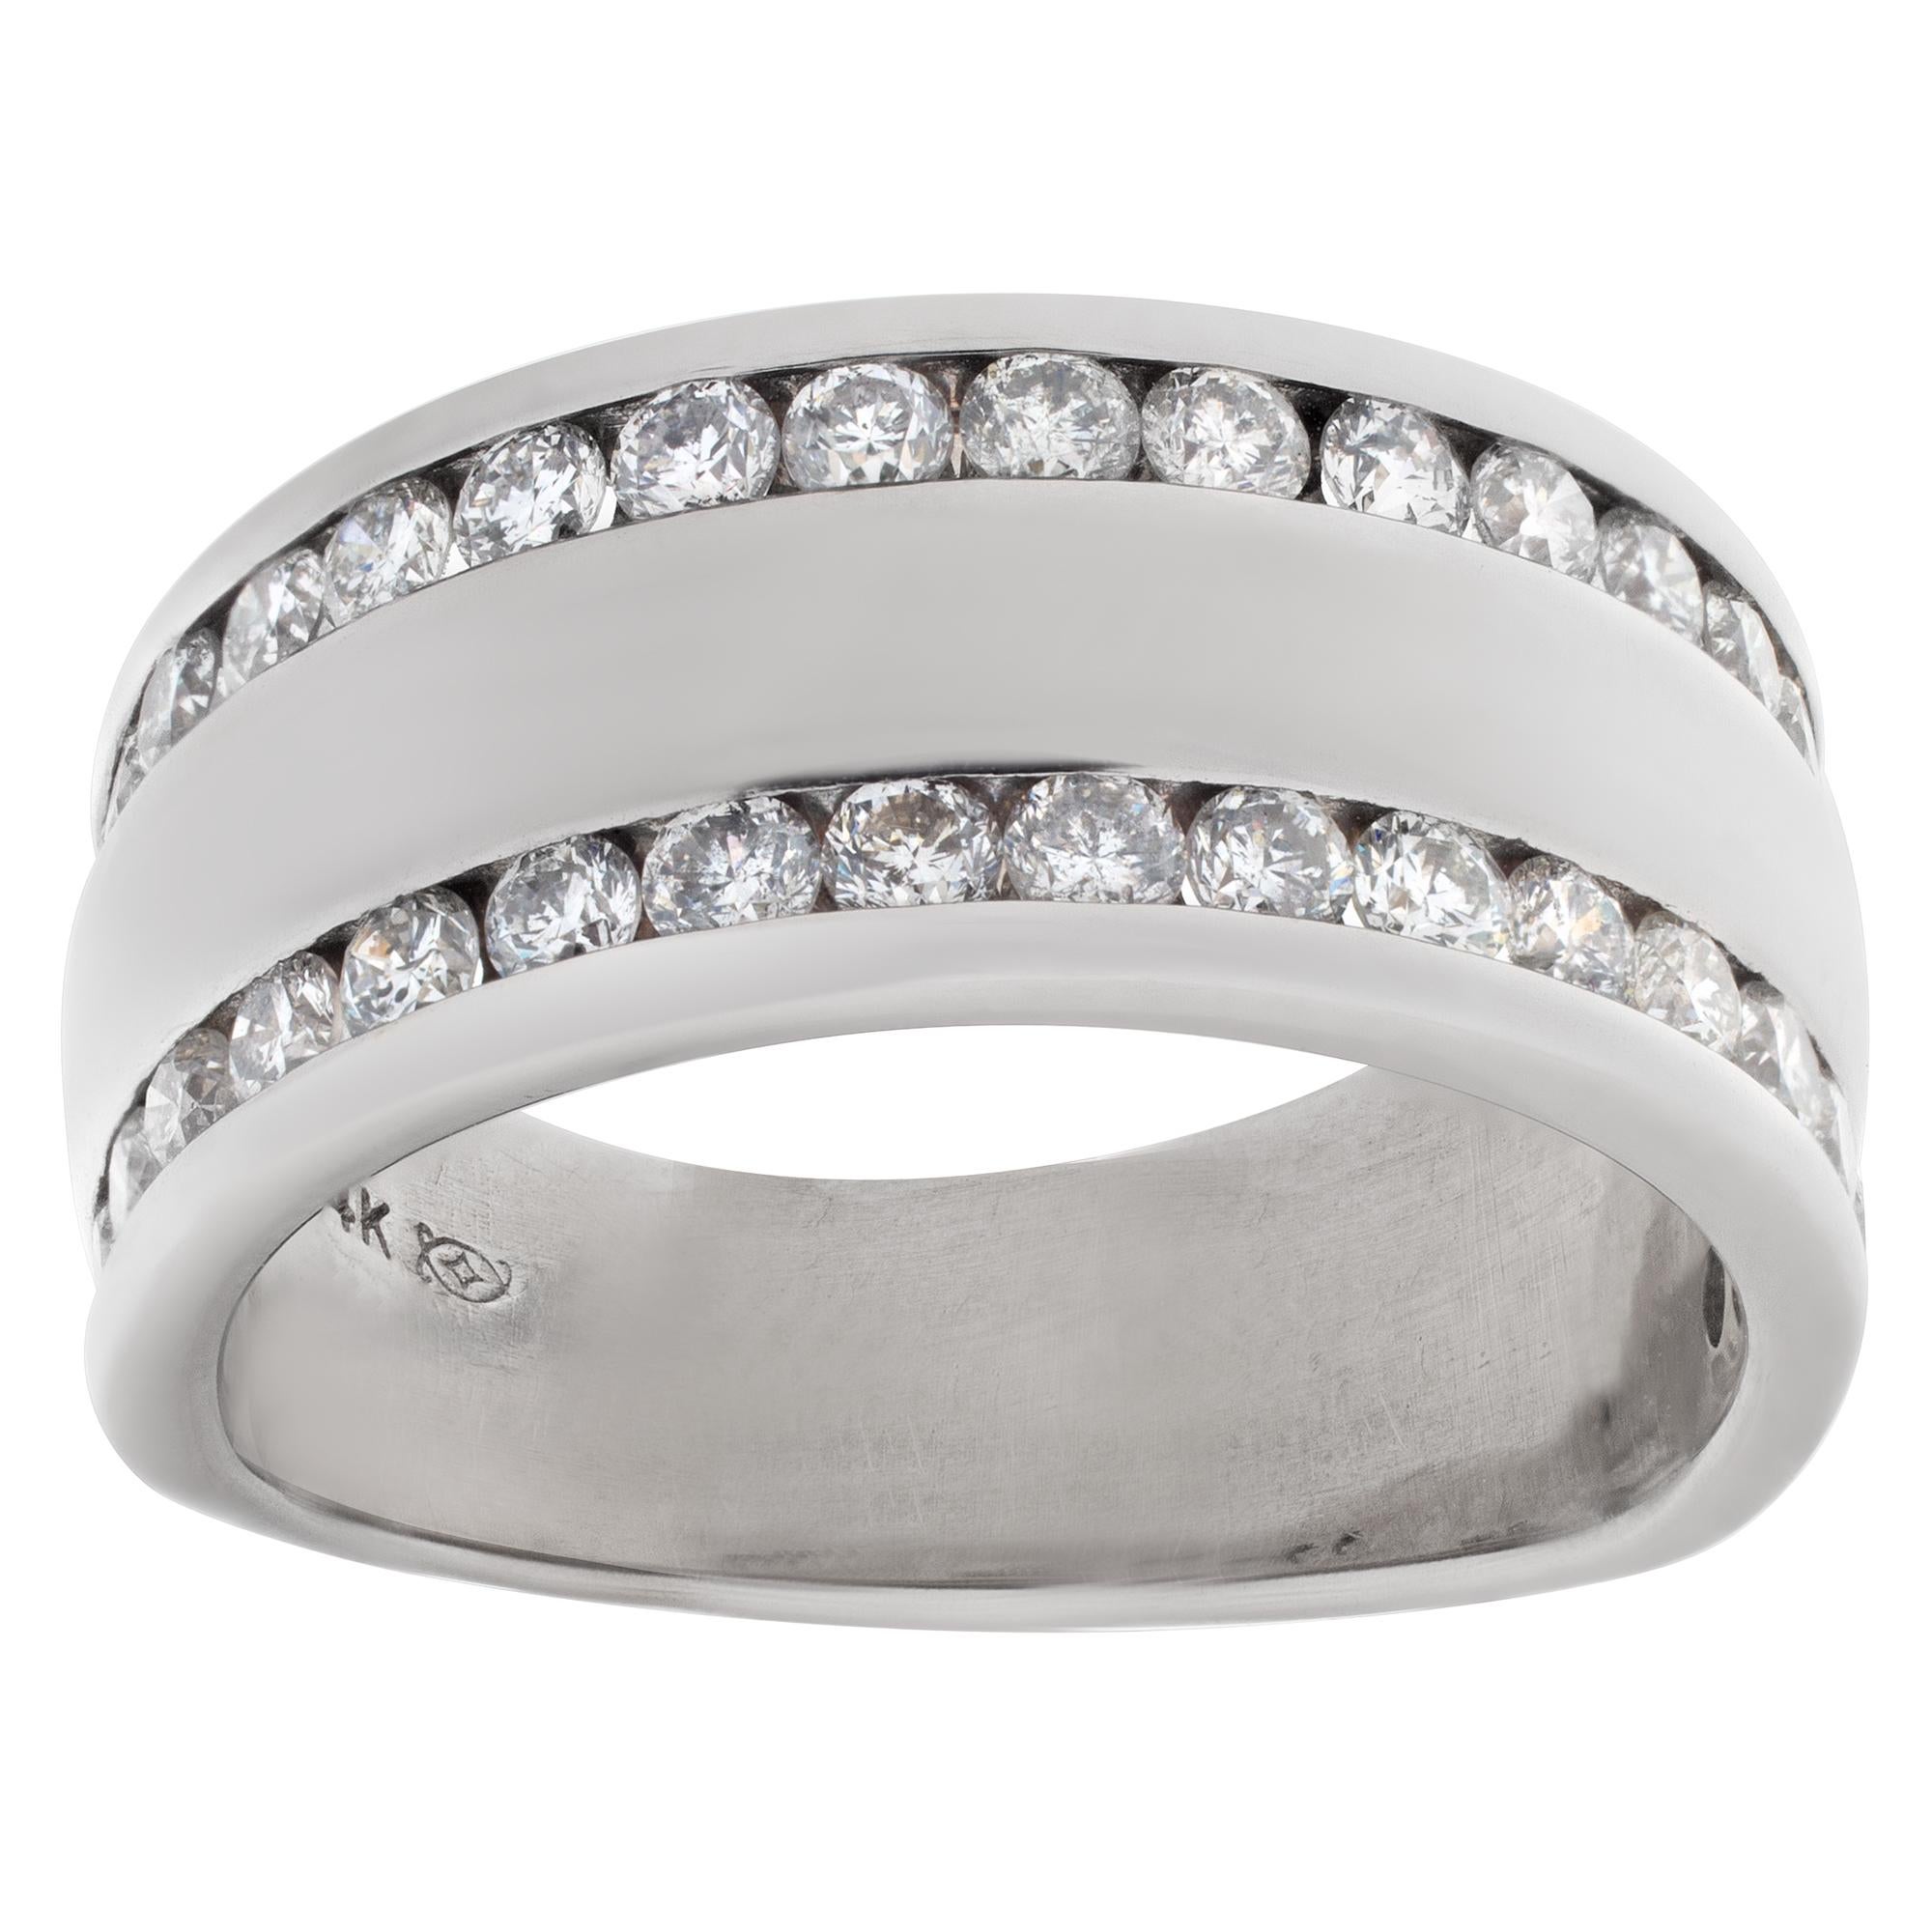 Diamond ring in 14k white gold with double row of channel set diamond accents; approximately 0.75 carats in estimated G-H color, VS clarity. Size 6.5

This Diamond ring is currently size 6.5 and some items can be sized up or down, please ask! It